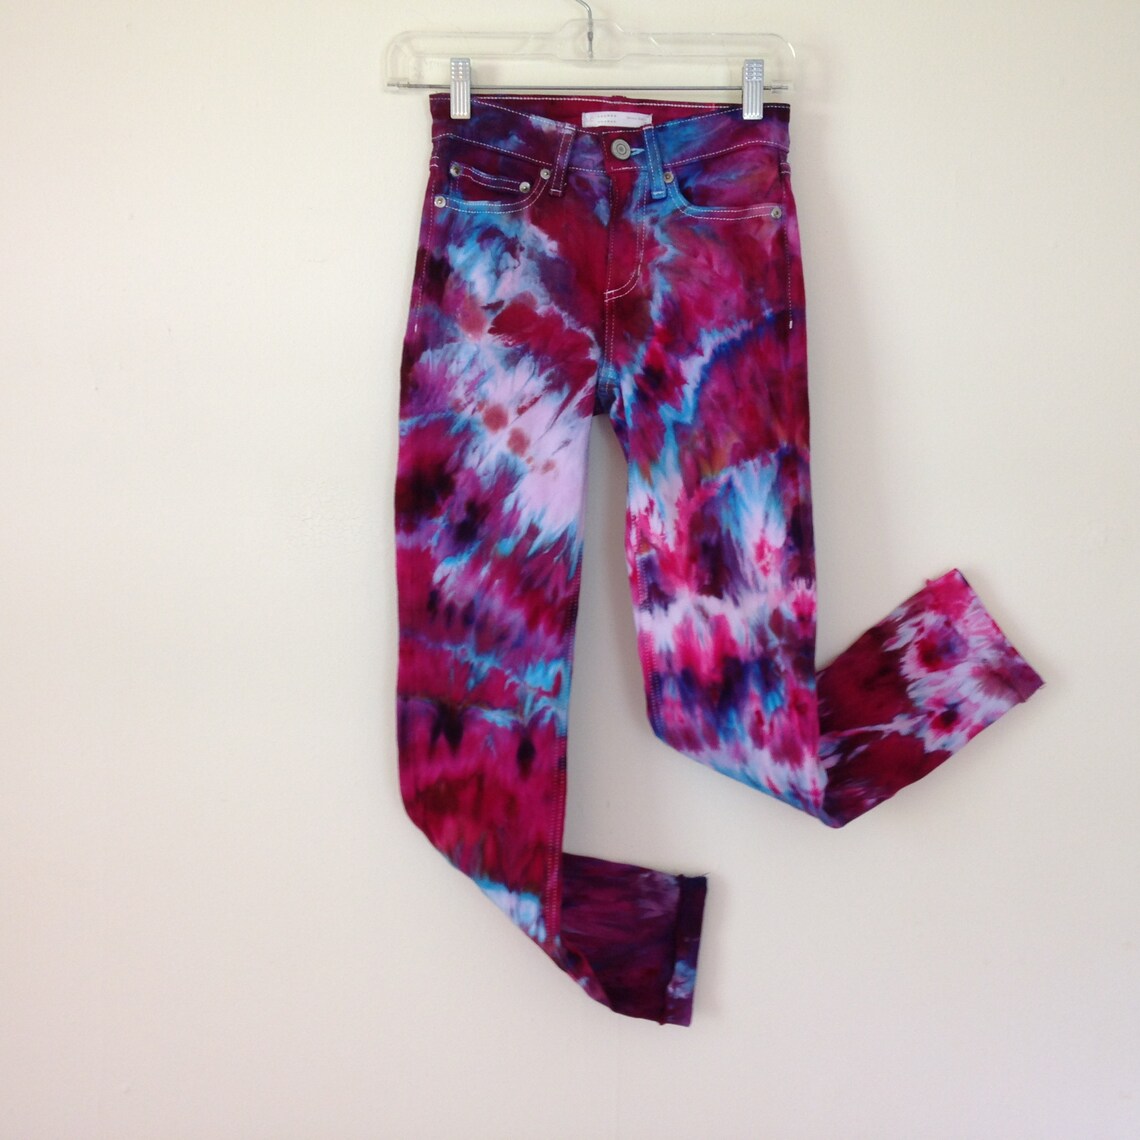 Tie Dye Skinny Jeans ice dyed in red purple turquoise | Etsy